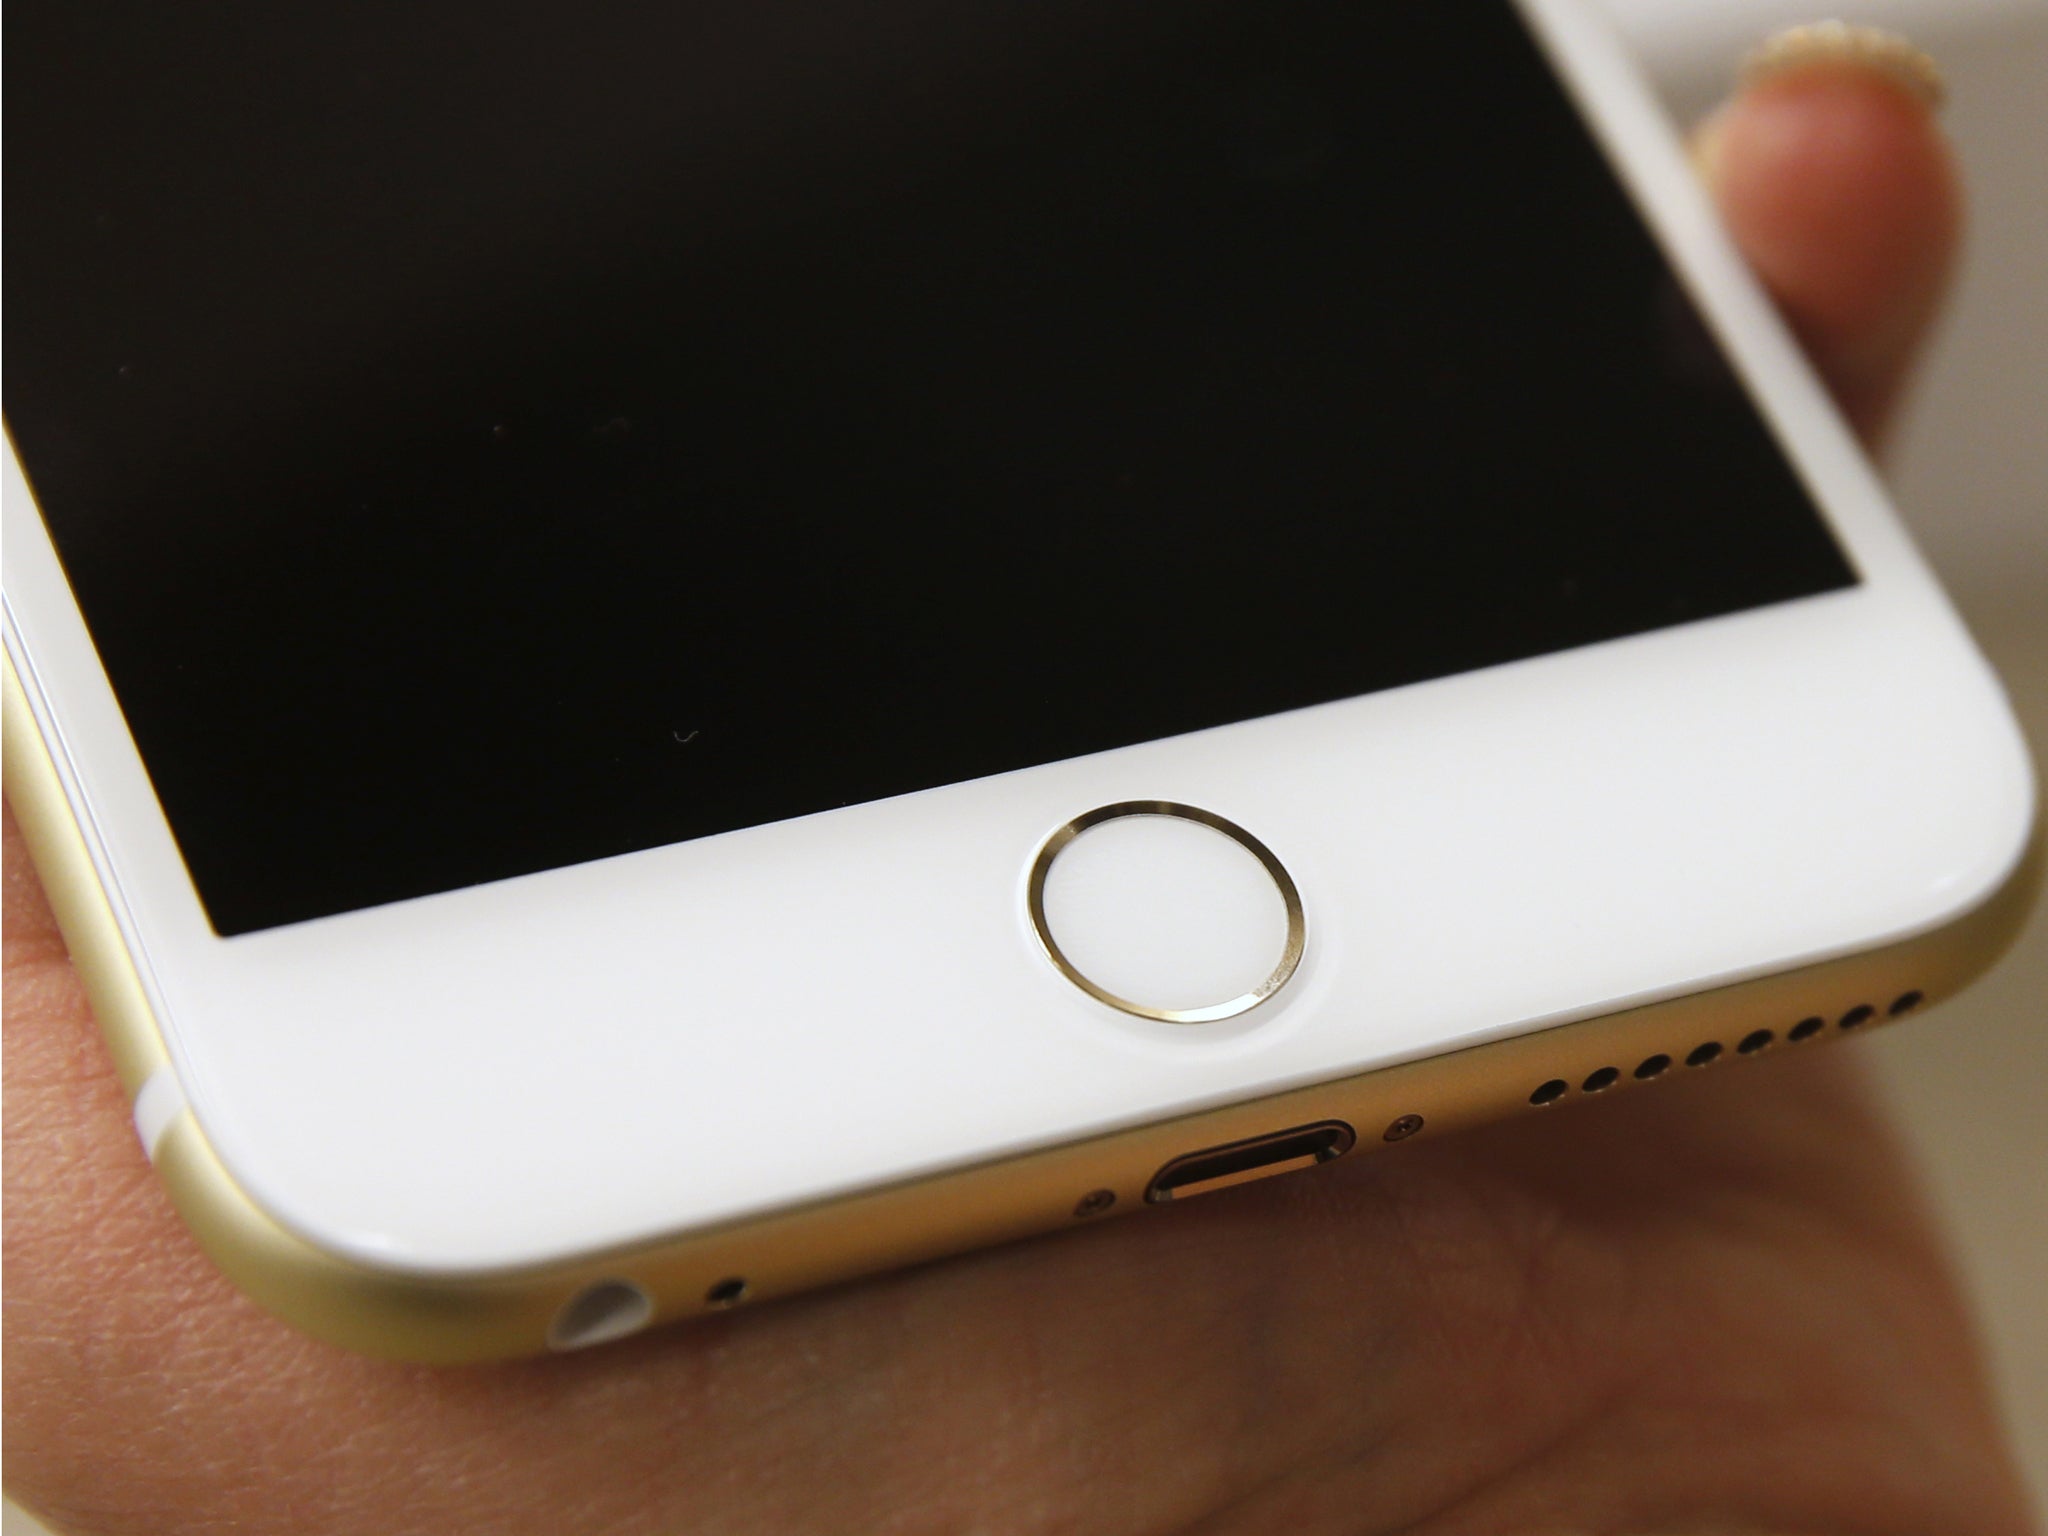 iPhone 6S: Force Touch pressure-sensitive display in new | The Independent | The